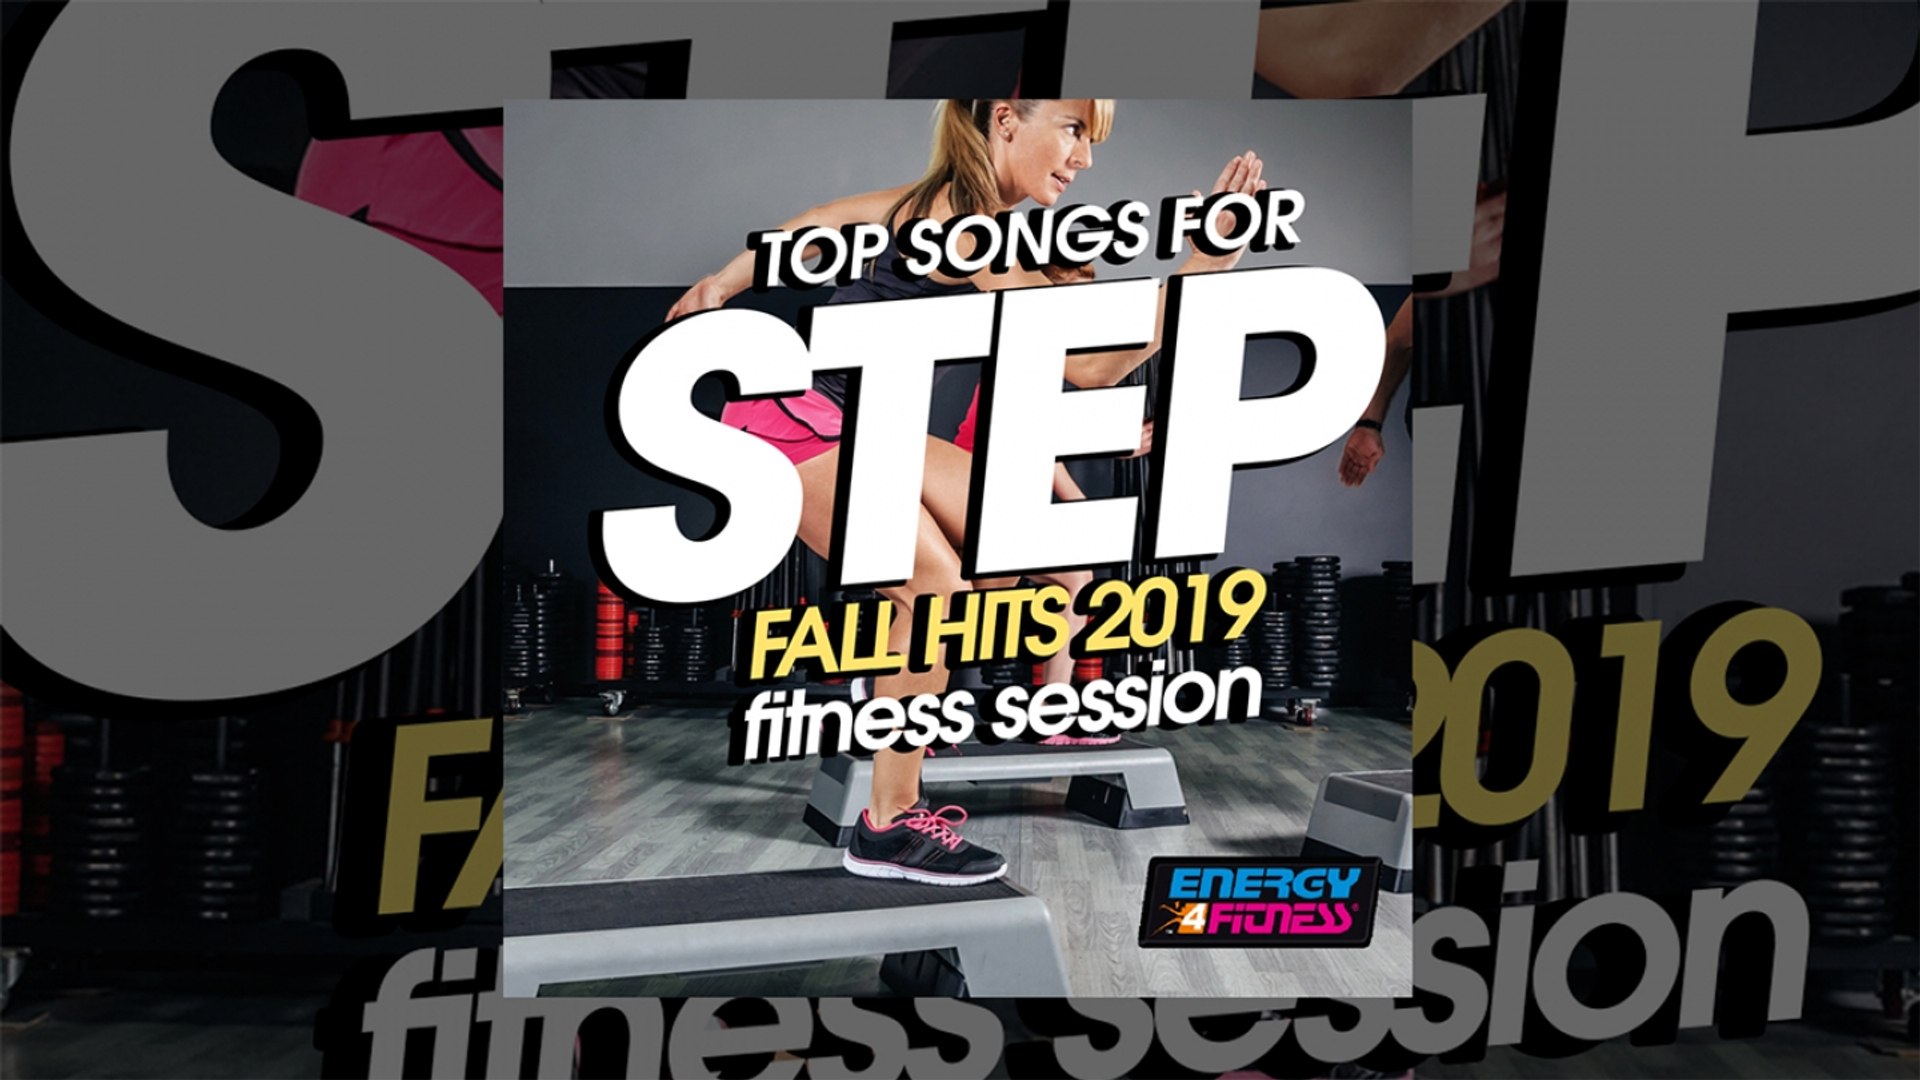 E4F - Top Songs For Step Fall Hits 2019 Fitness Session - Fitness & Music 2019